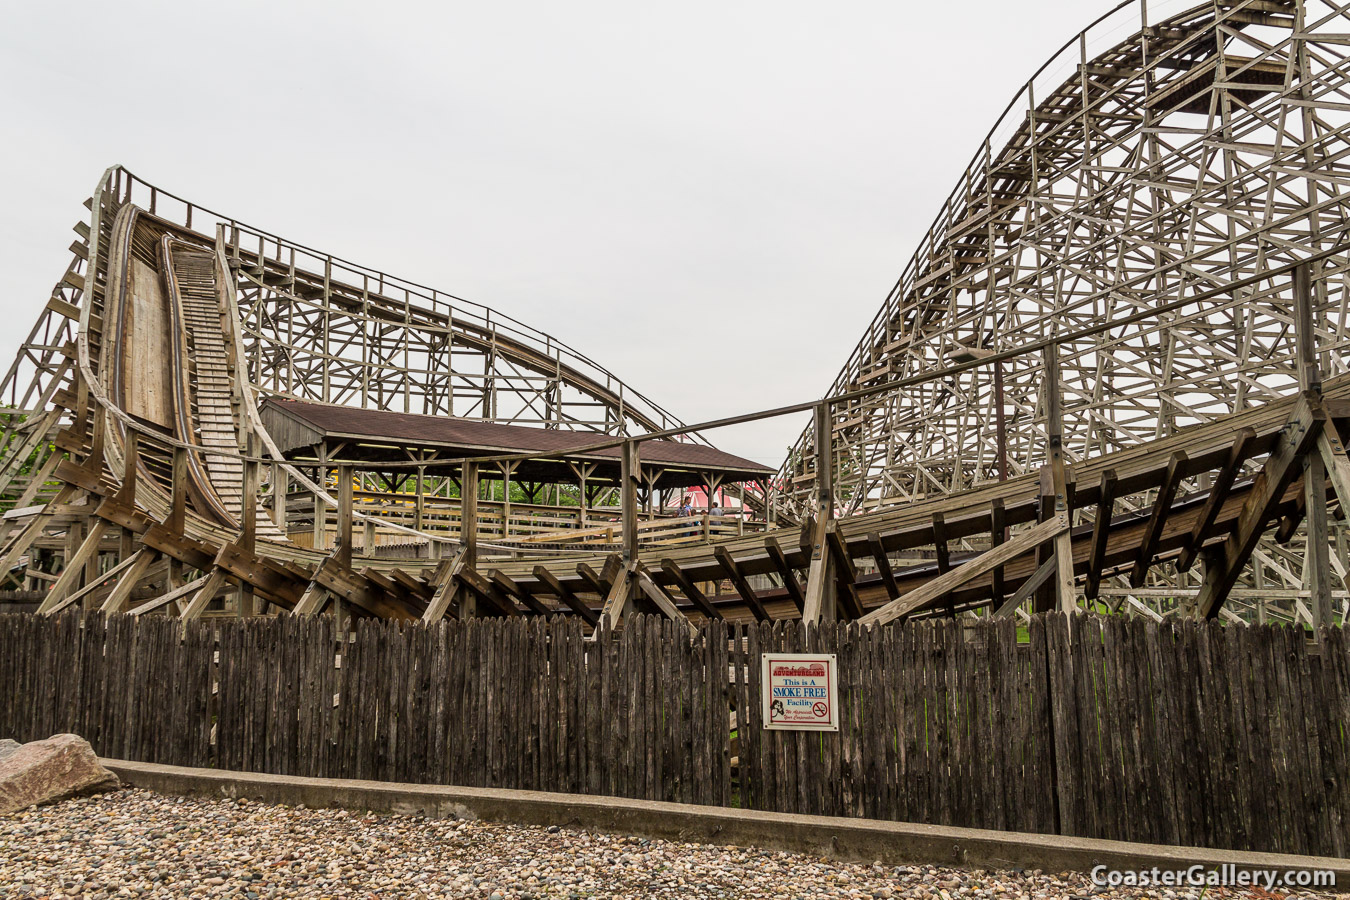 Outlaw roller coaster - picture of the loading platform